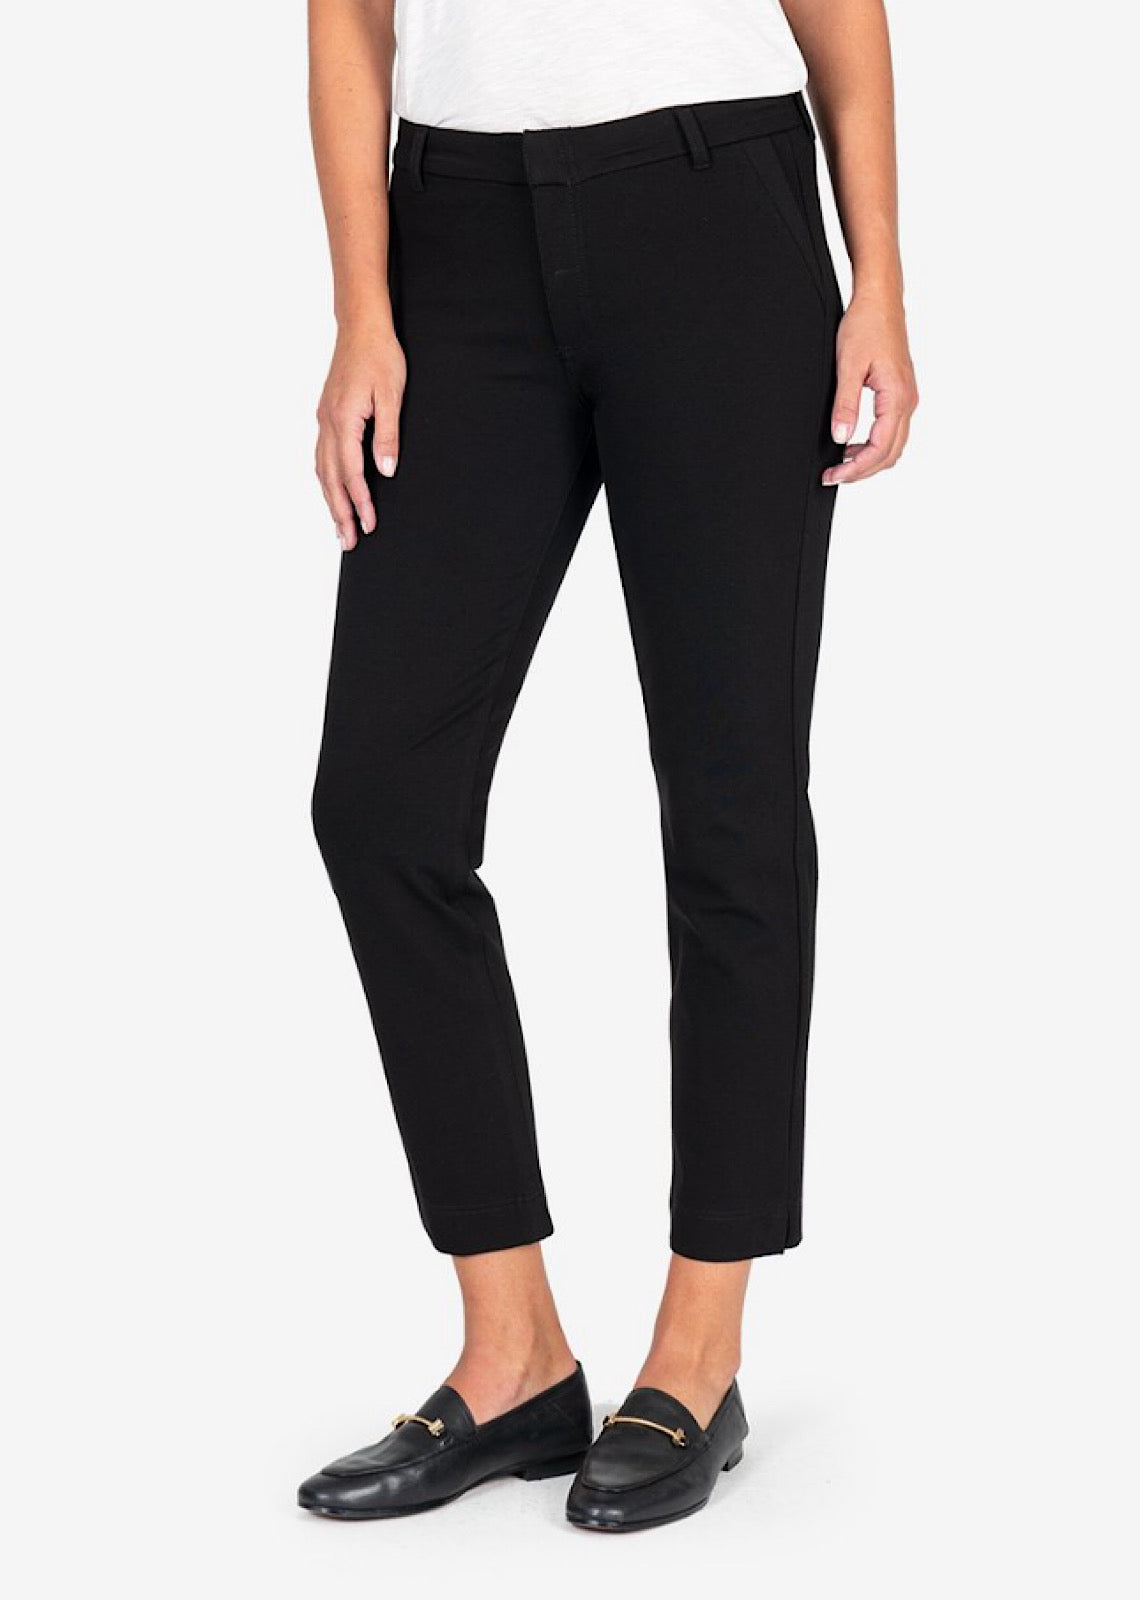 Buy Kut From The Kloth Drawcord Waist Crop Pants  Rhodonite At 69 Off   Editorialist